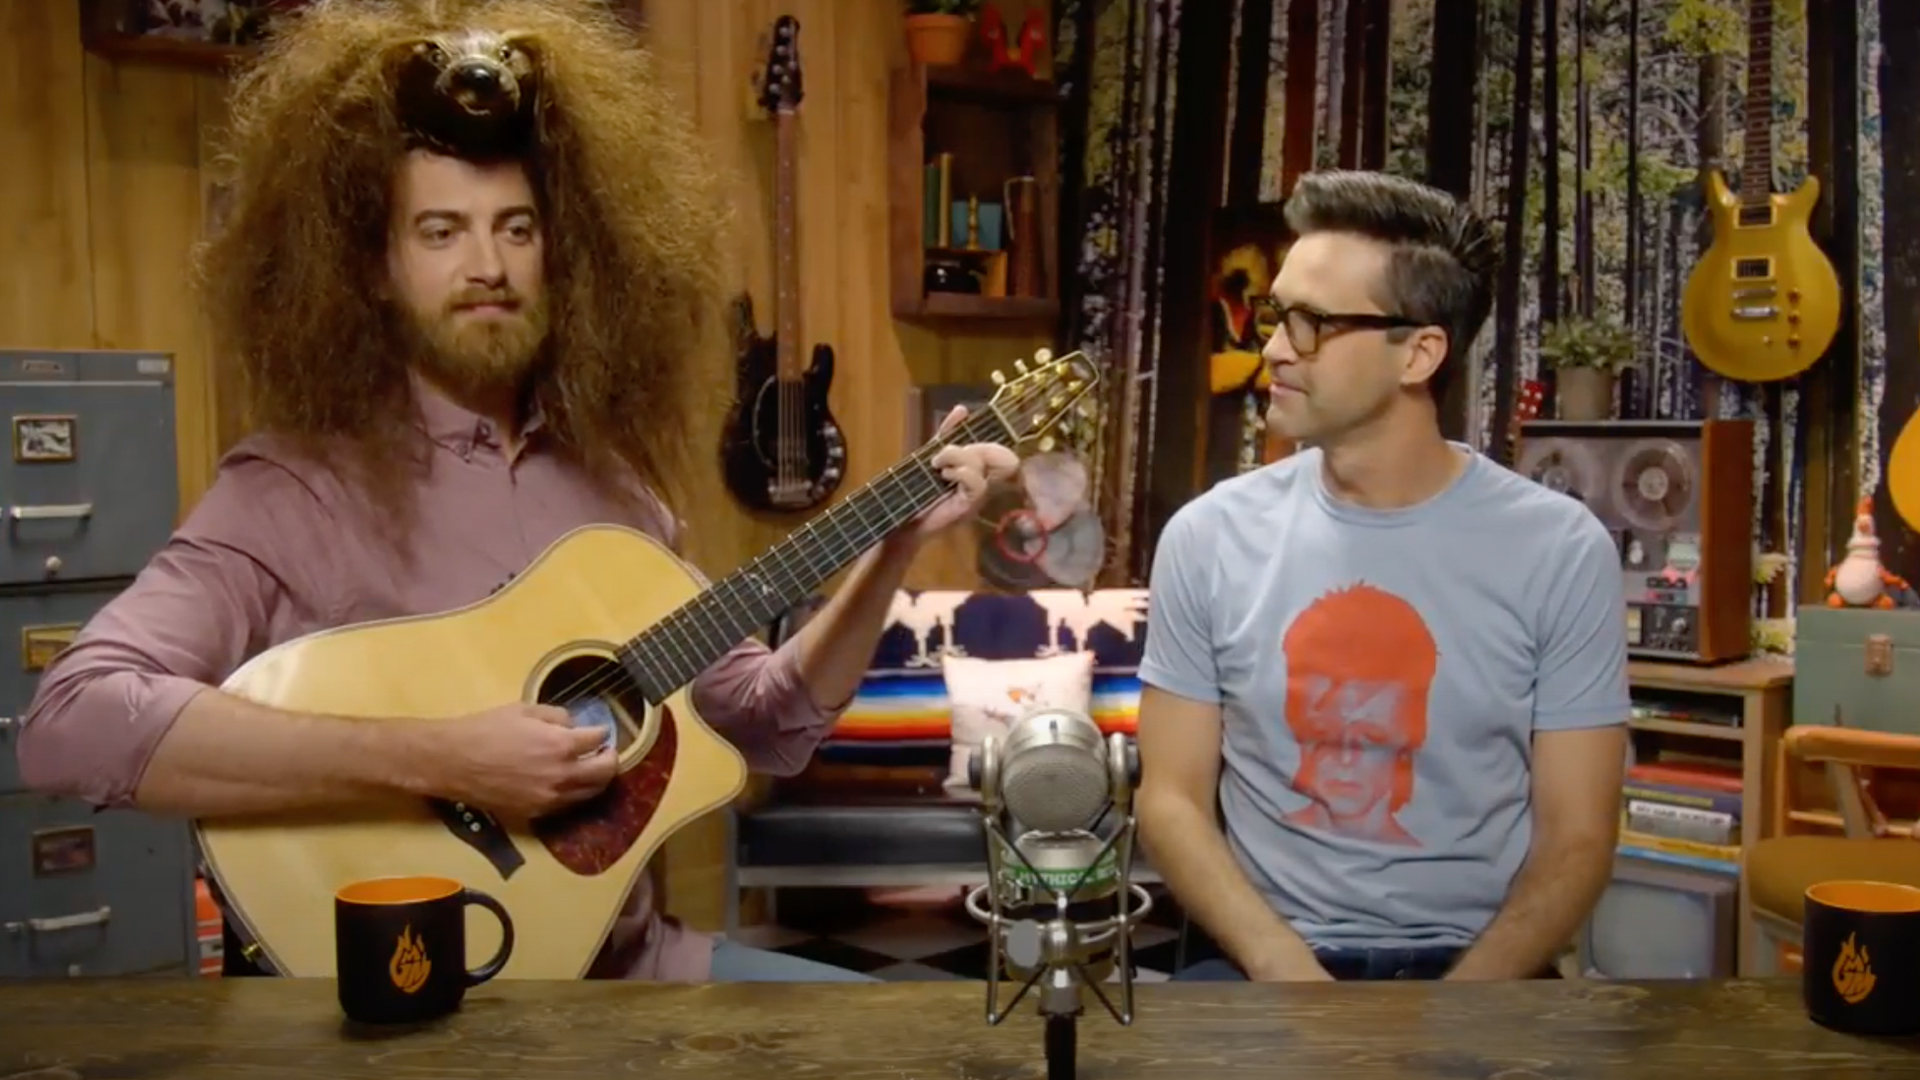 Thursday means what in the GMM world?